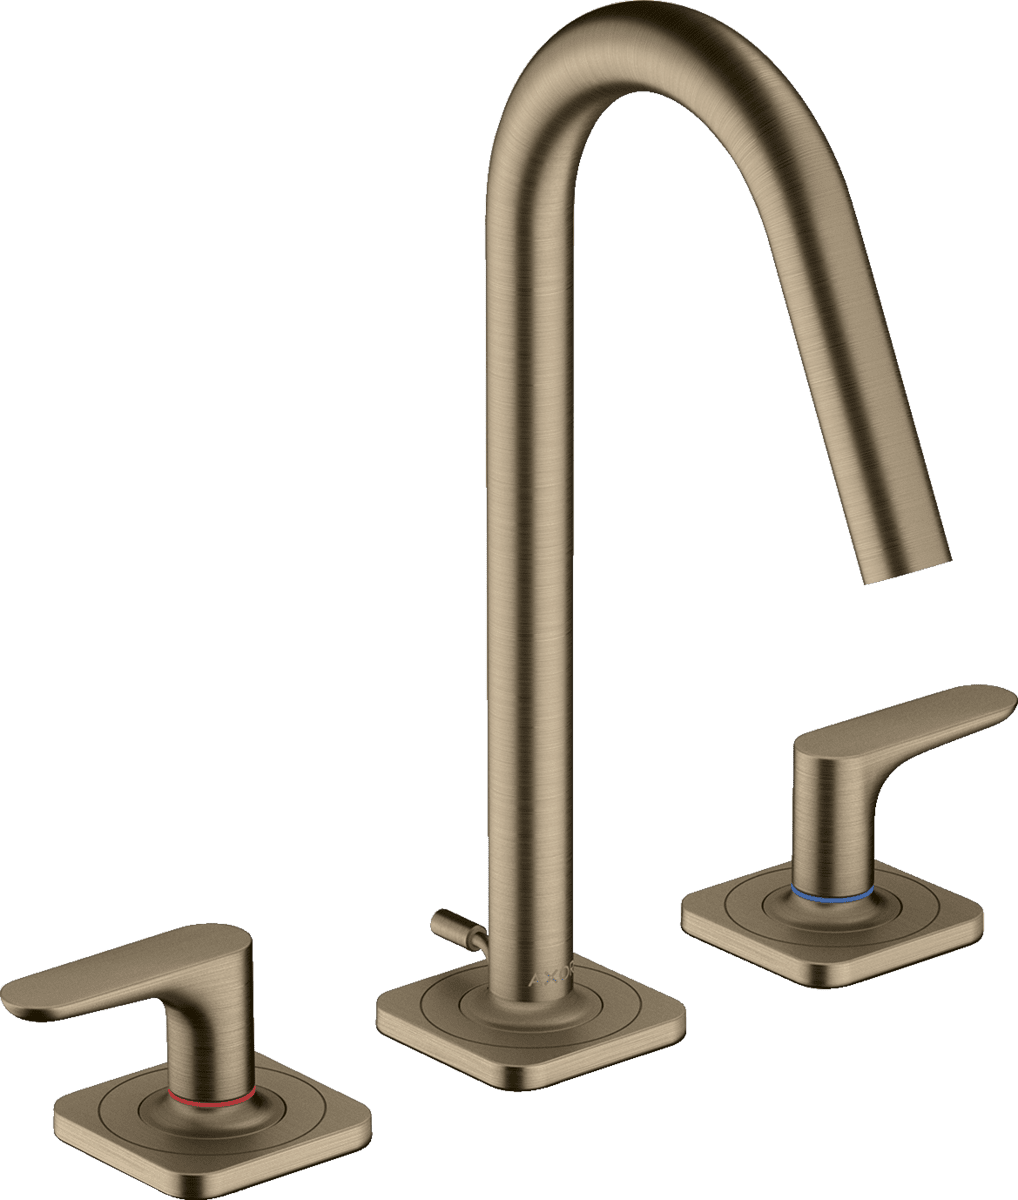 Зображення з  HANSGROHE AXOR Citterio M 3-hole basin mixer 160 with lever handles, escutcheons and pop-up waste set #34133820 - Brushed Nickel